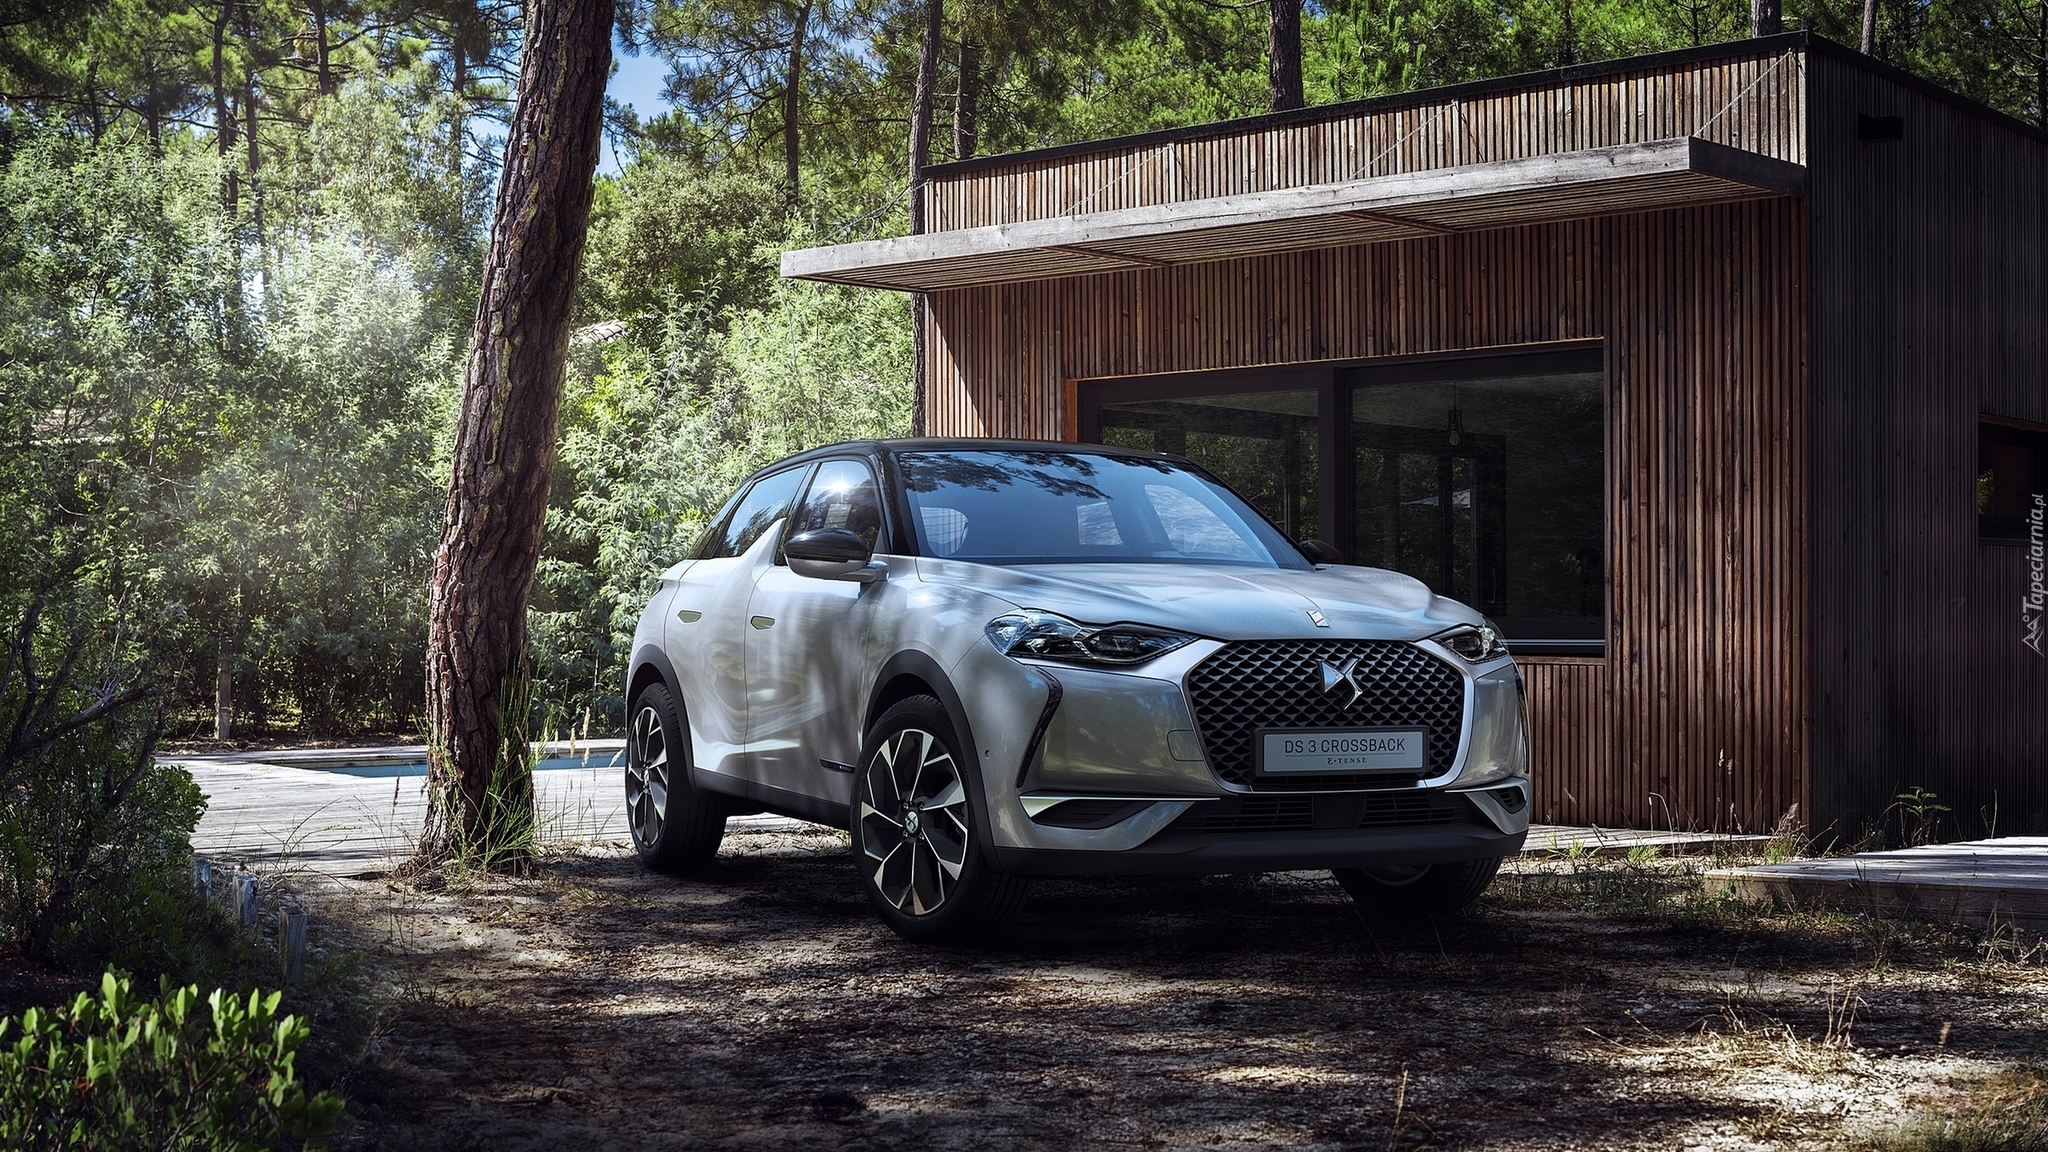 DS 3 Crossback, 2019